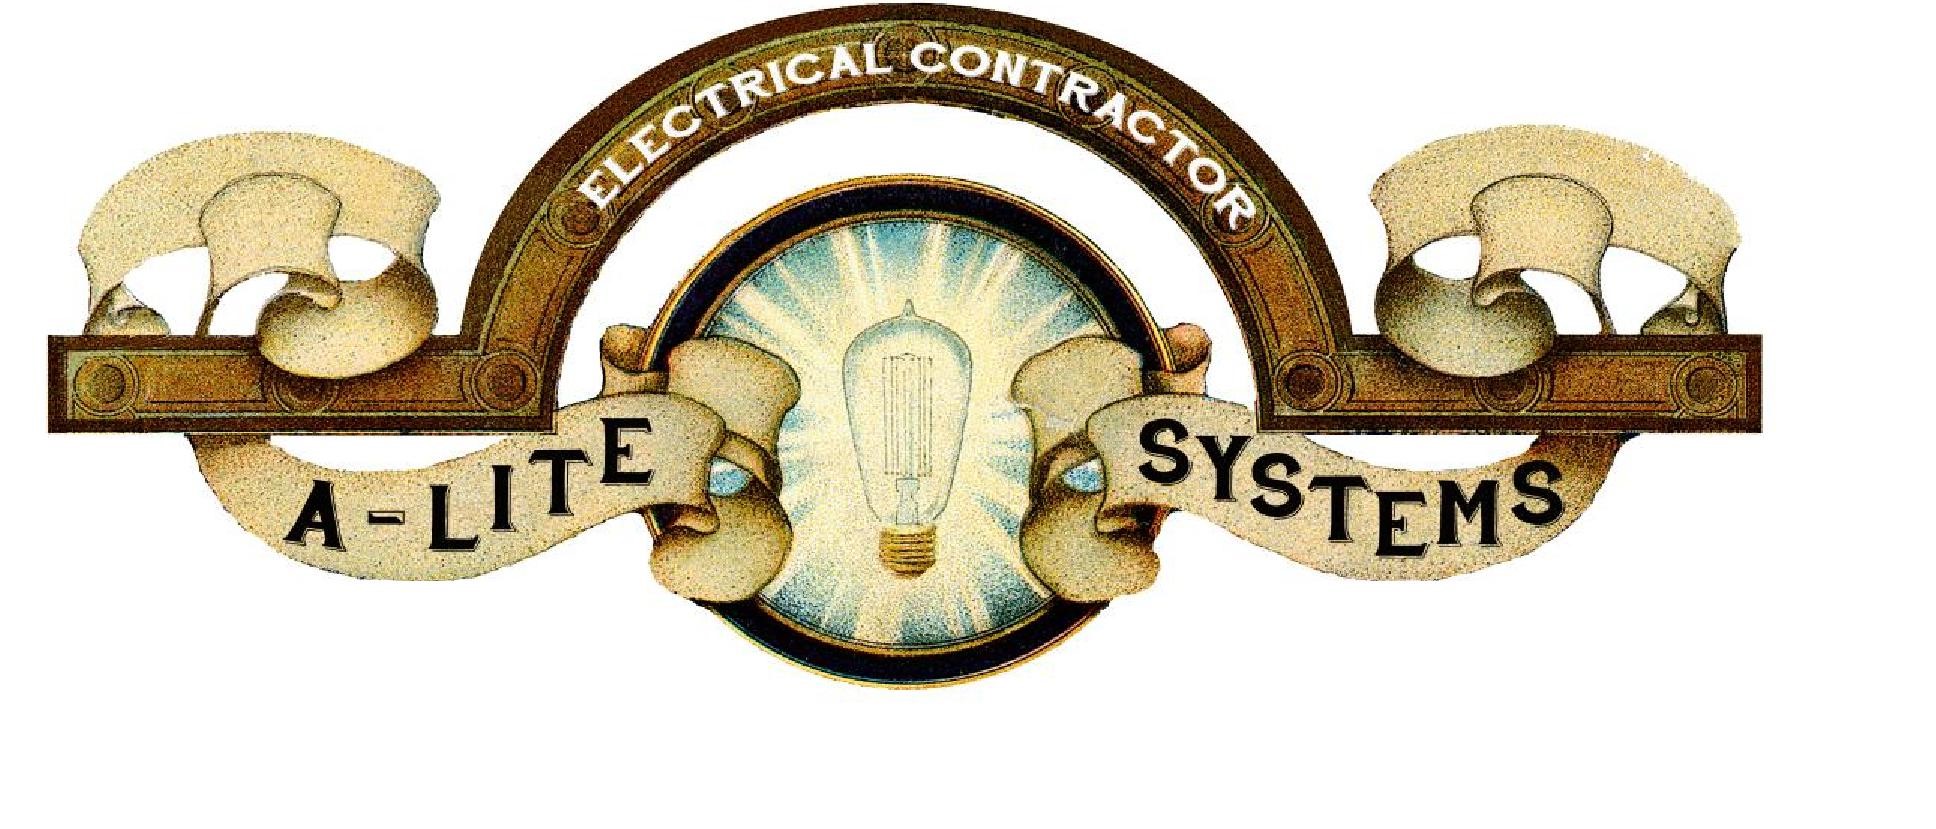 A-lite Electric Systems Logo